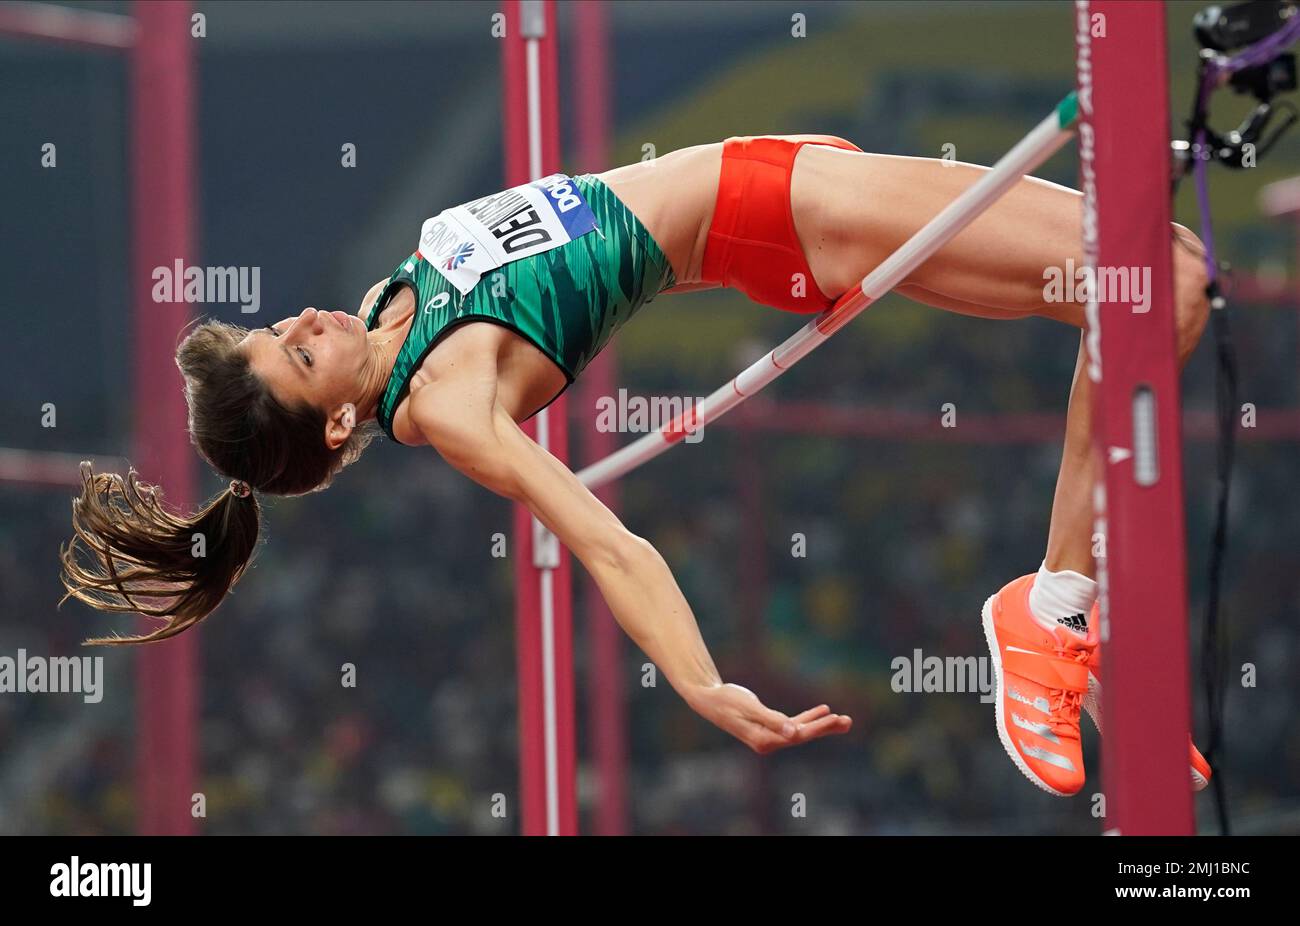 Karyna Demidik, of Belarus, competes in the women's high jump final at ...